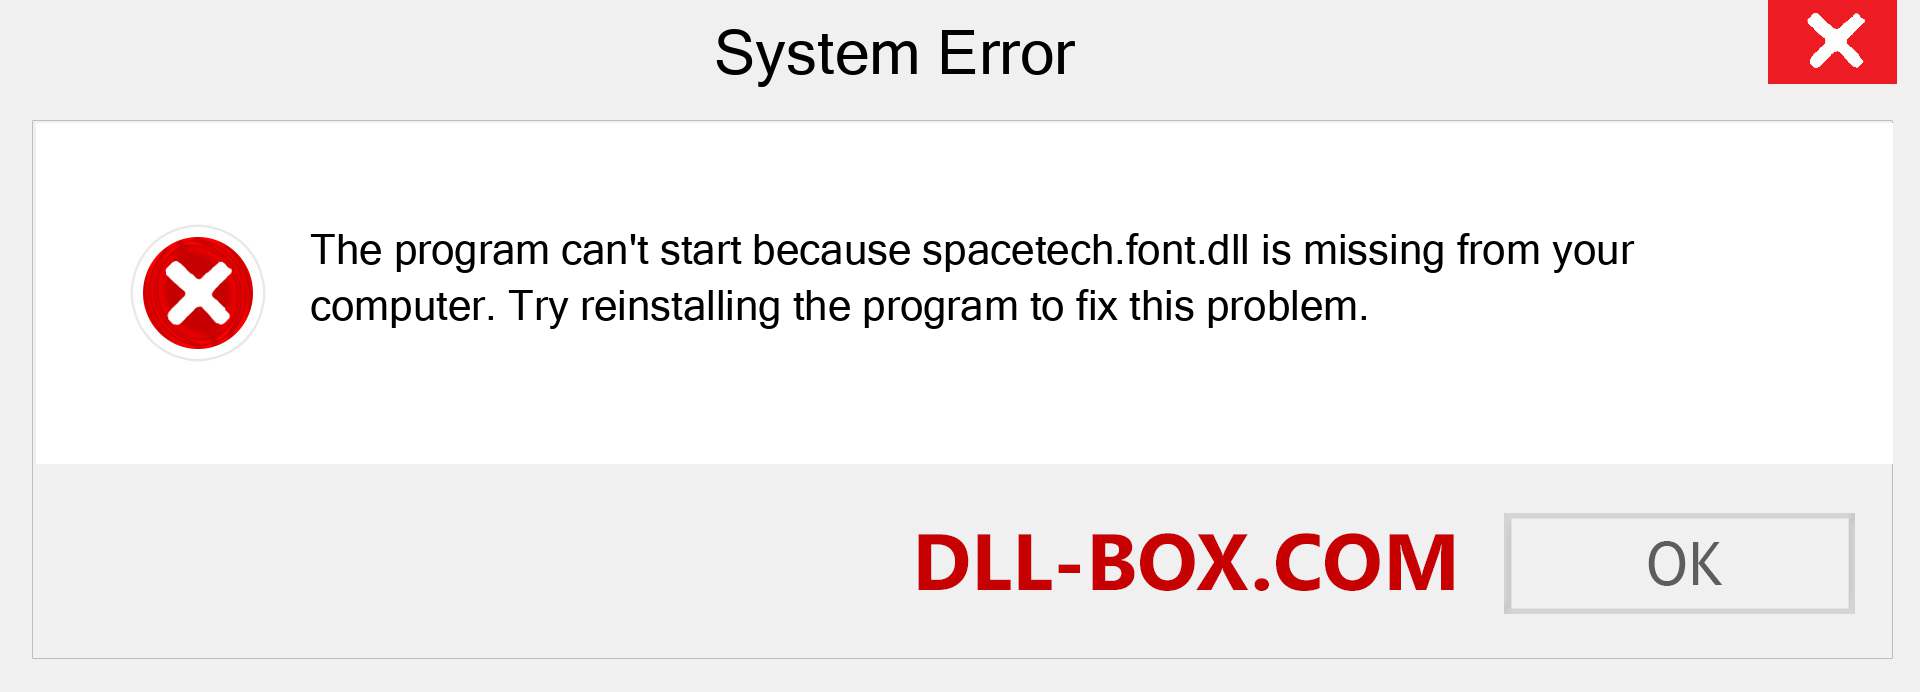  spacetech.font.dll file is missing?. Download for Windows 7, 8, 10 - Fix  spacetech.font dll Missing Error on Windows, photos, images